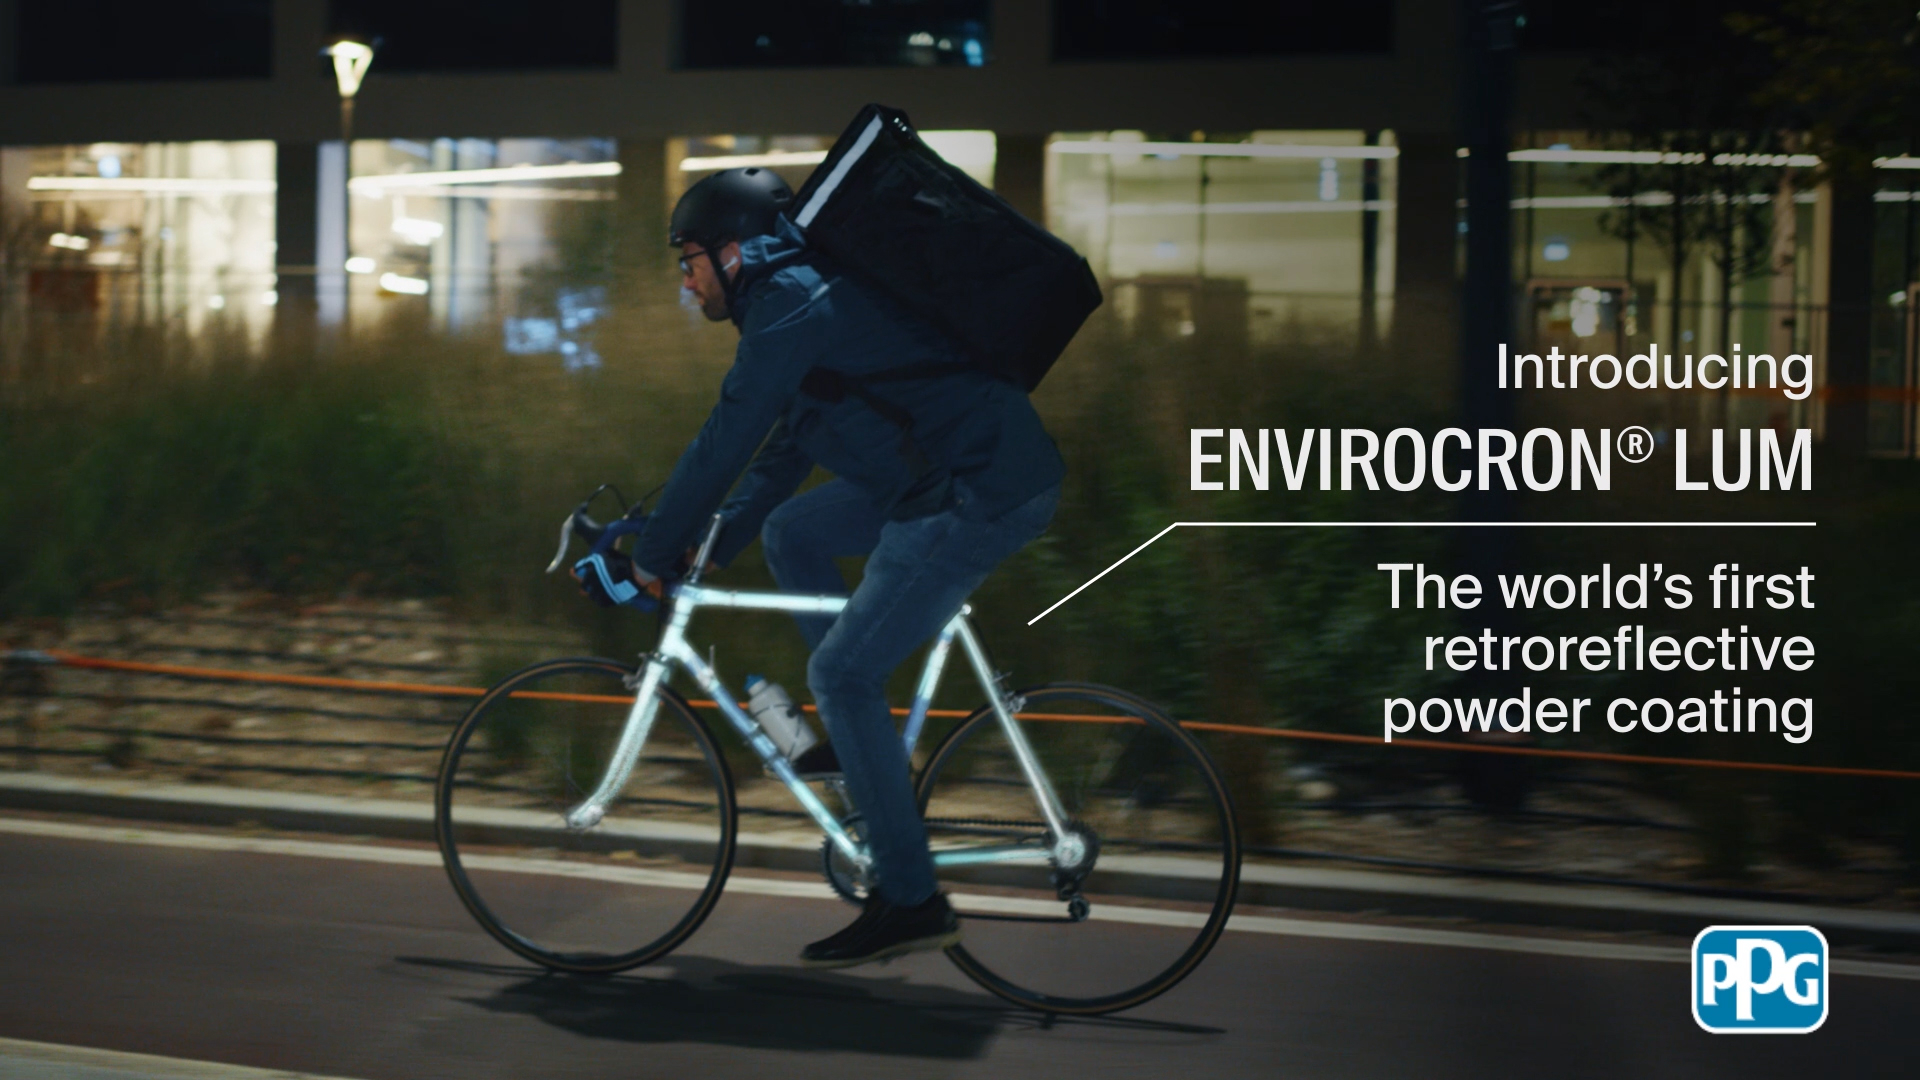 PPG ENVIROCRON™ LUM retroreflective powder is ideal for a variety of applications, including guardrails, bicycles, scooters, safety equipment, tools, fences and shopping carts.